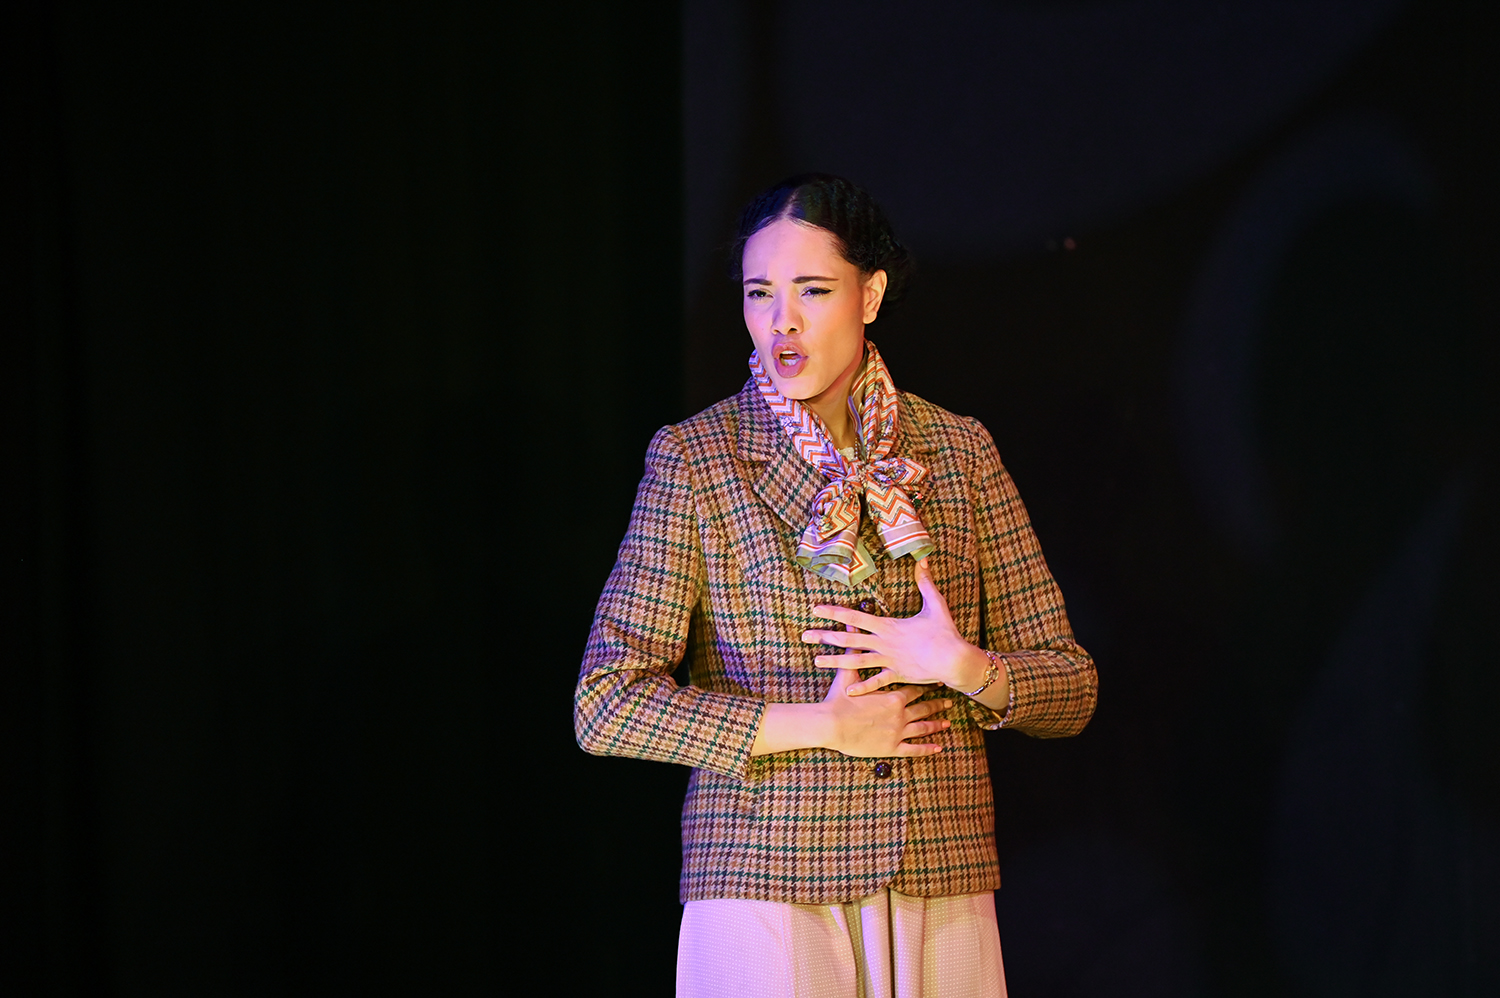 A woman wearing a tweed jacket and scarf singing on stage